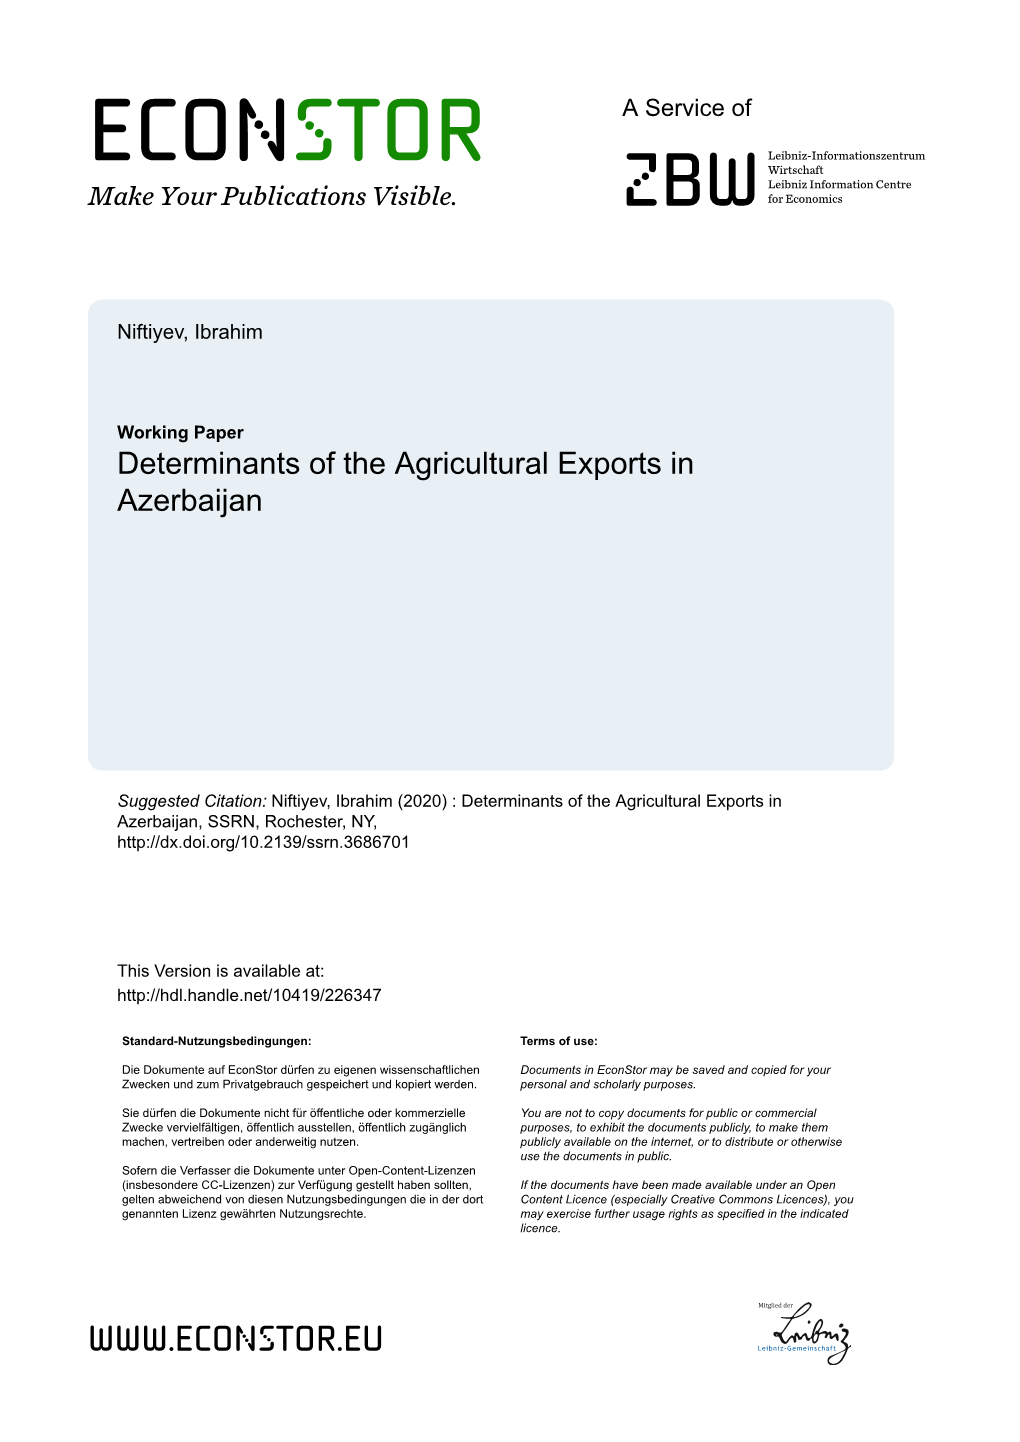 Determinants of the Agricultural Exports in Azerbaijan